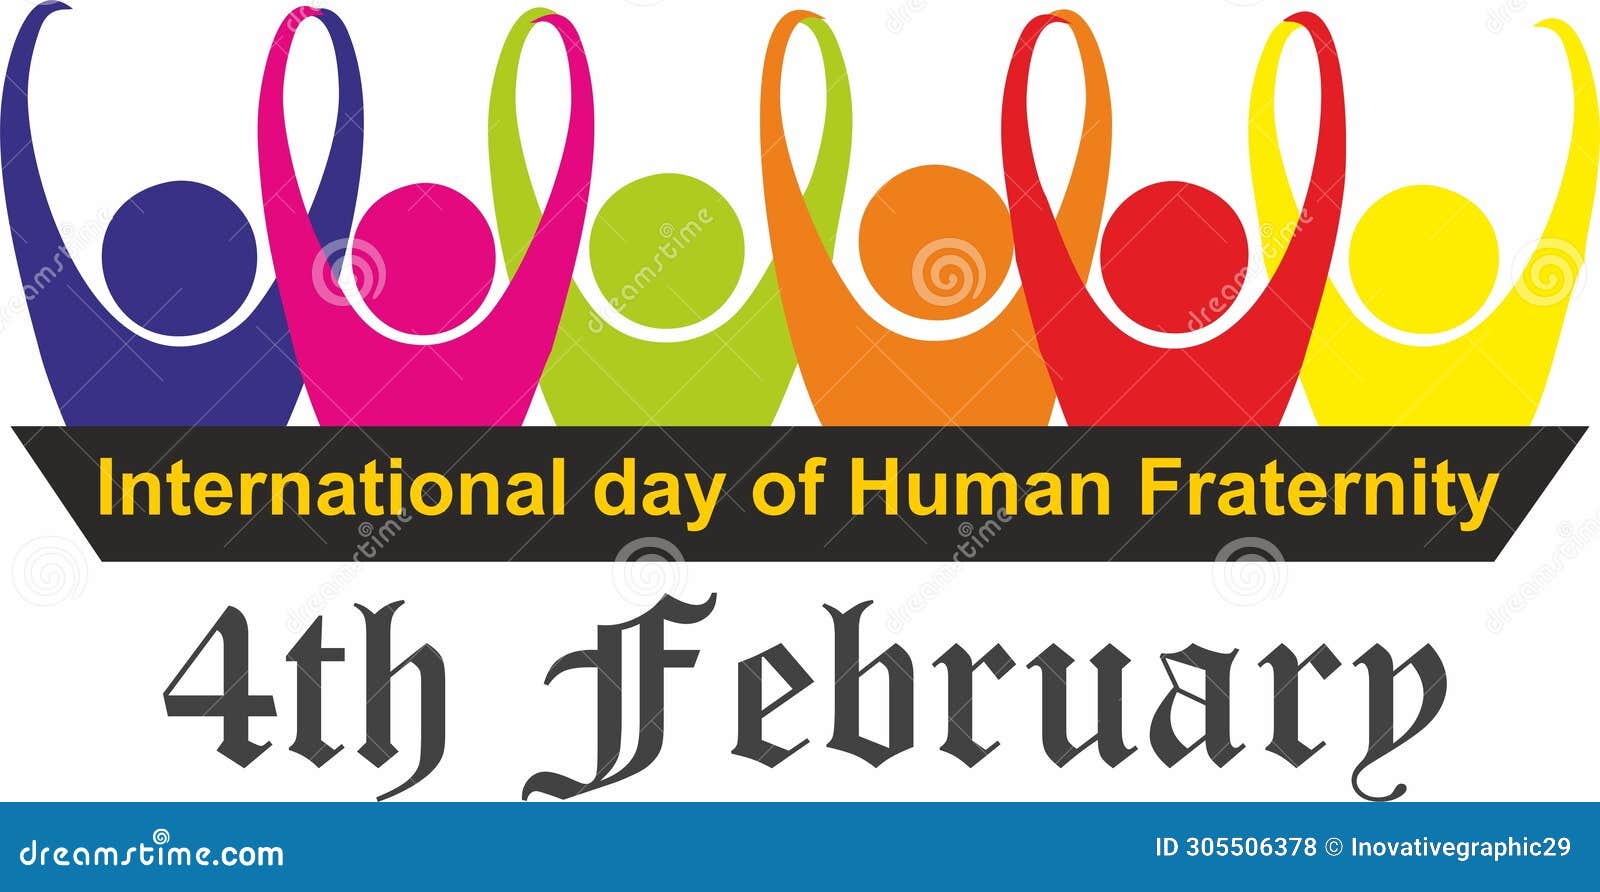 international day of human fraternity